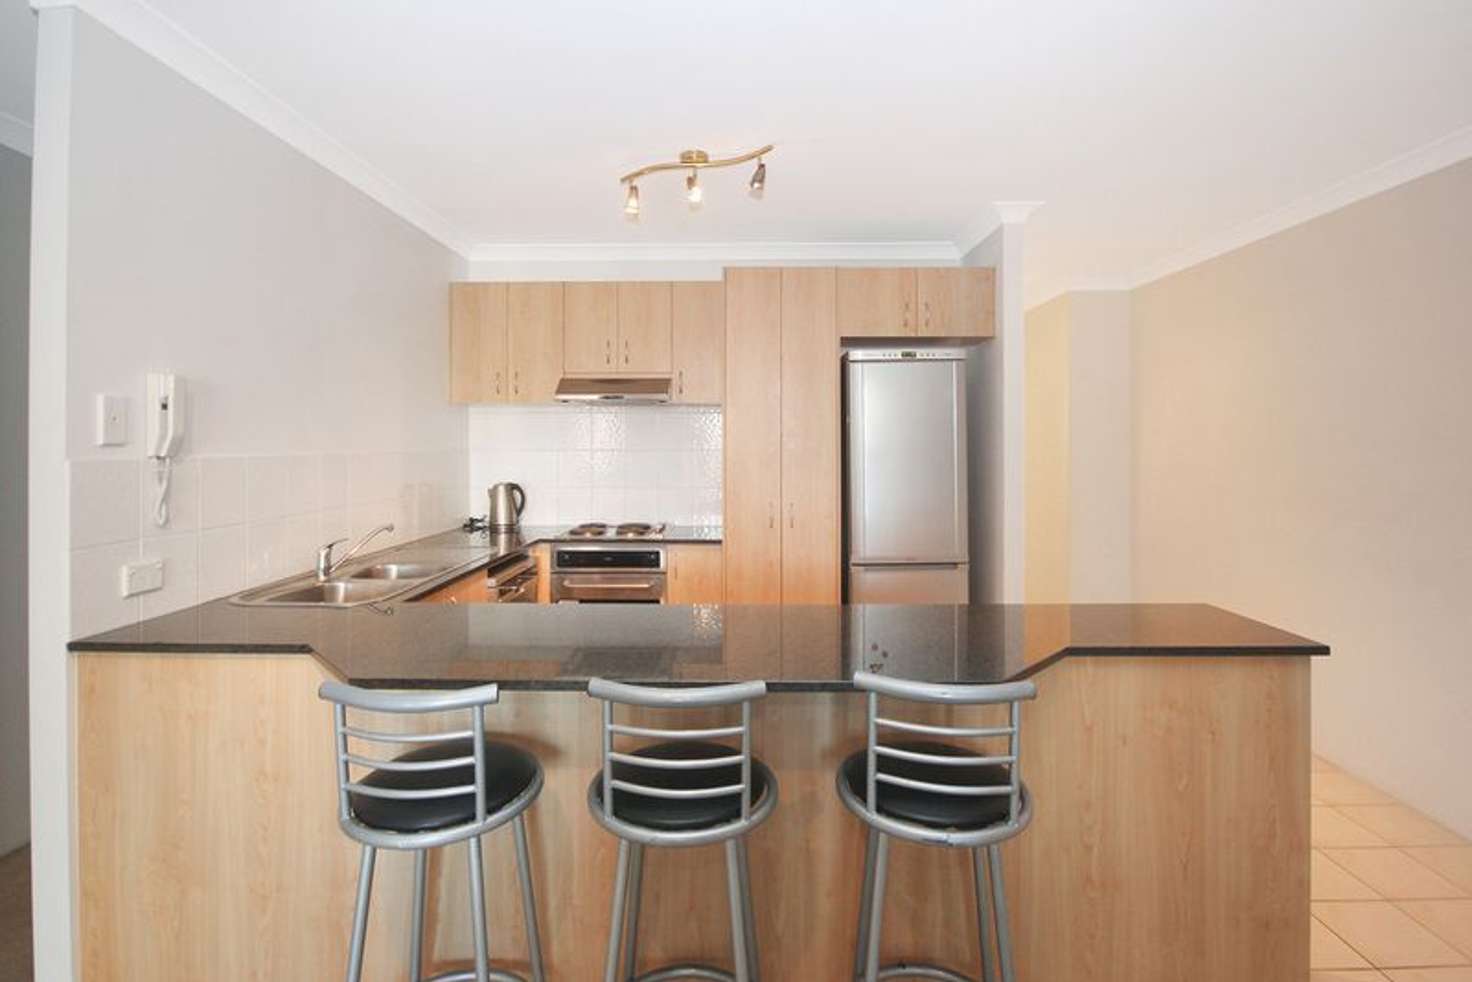 Main view of Homely apartment listing, 23/7-9 Bennett Street, East Perth WA 6004